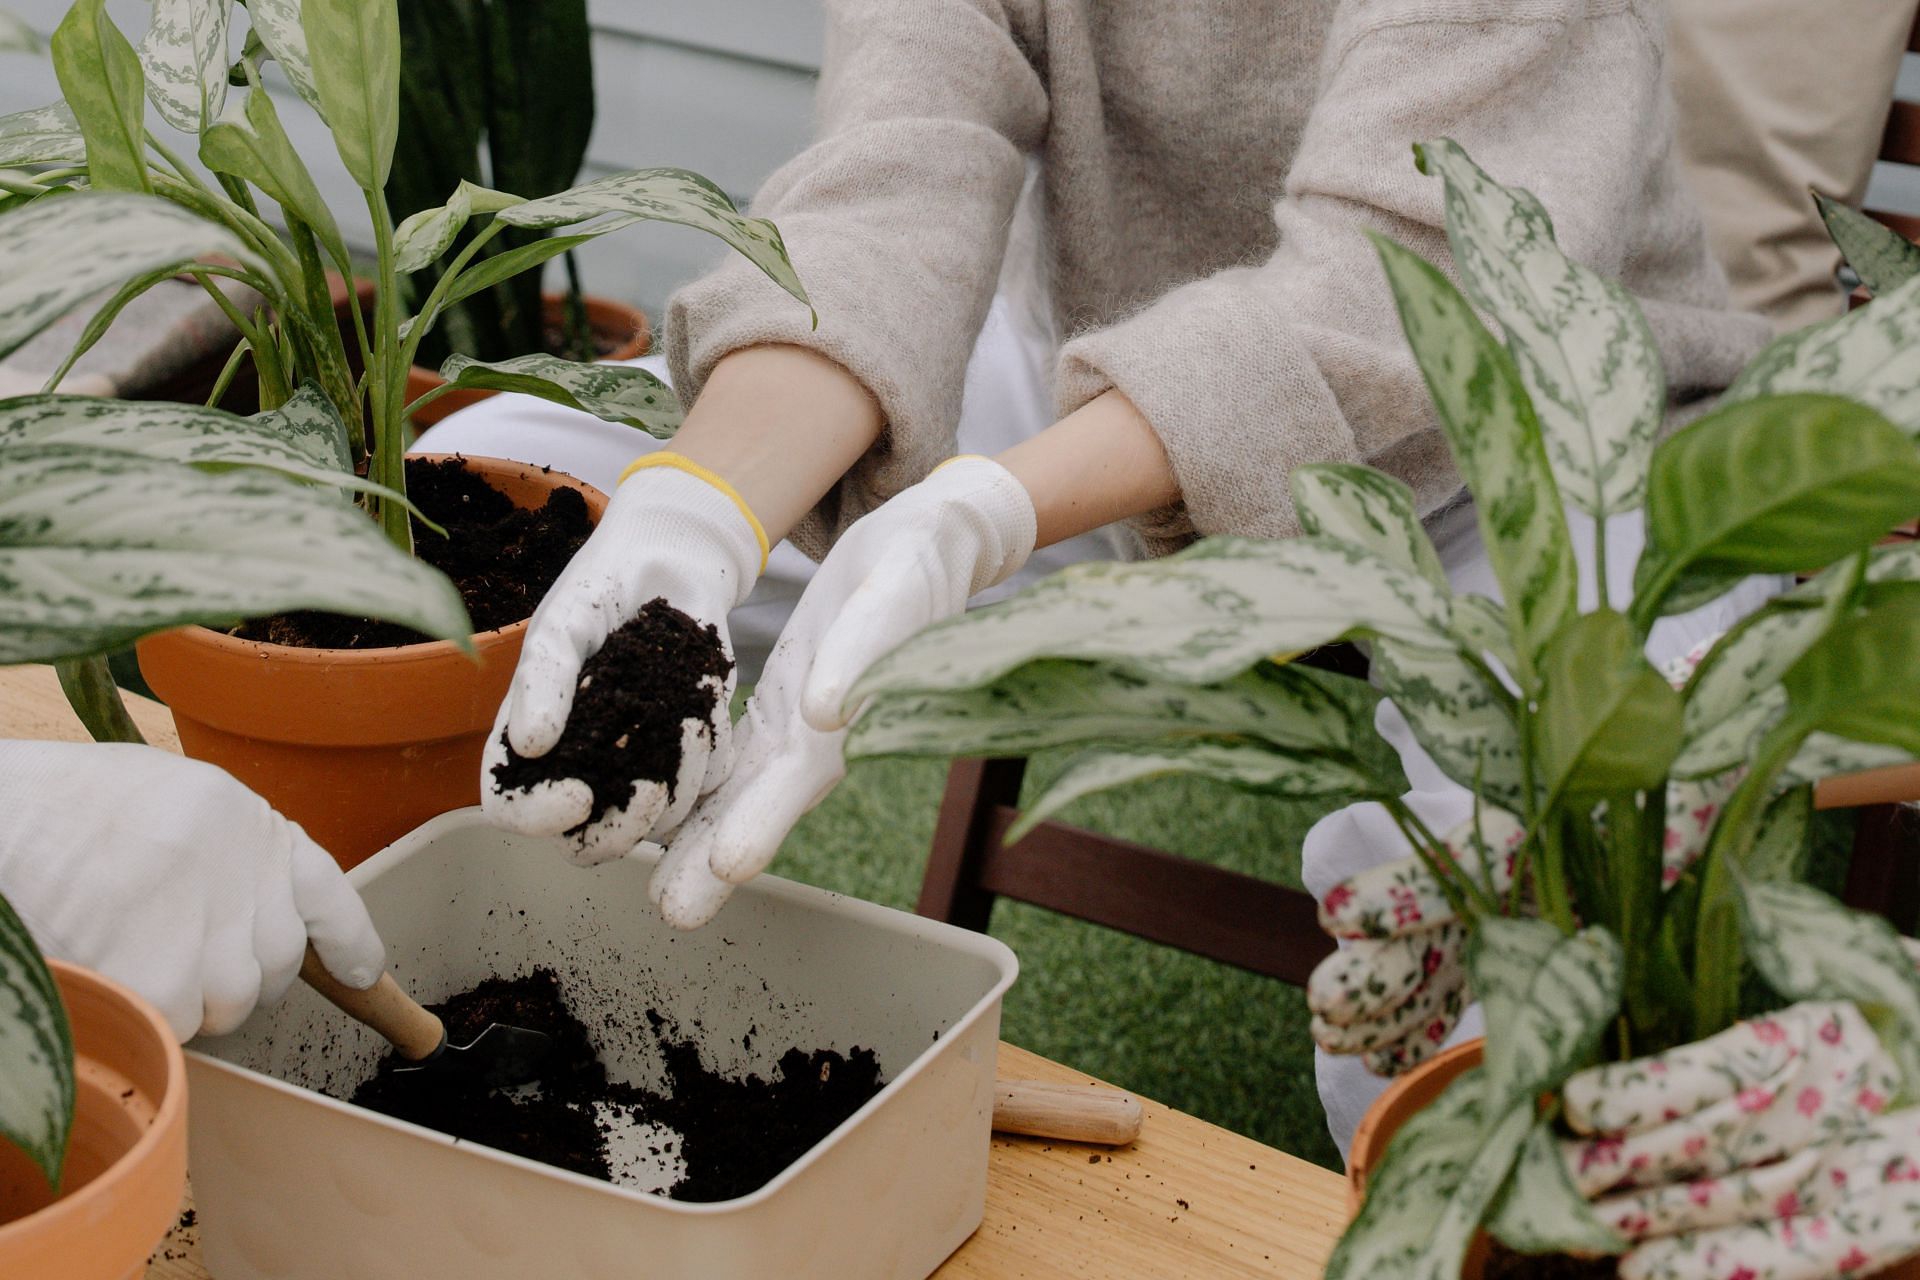 Wear gloves while gardening for ten-word hand care(Image Via Pexels)